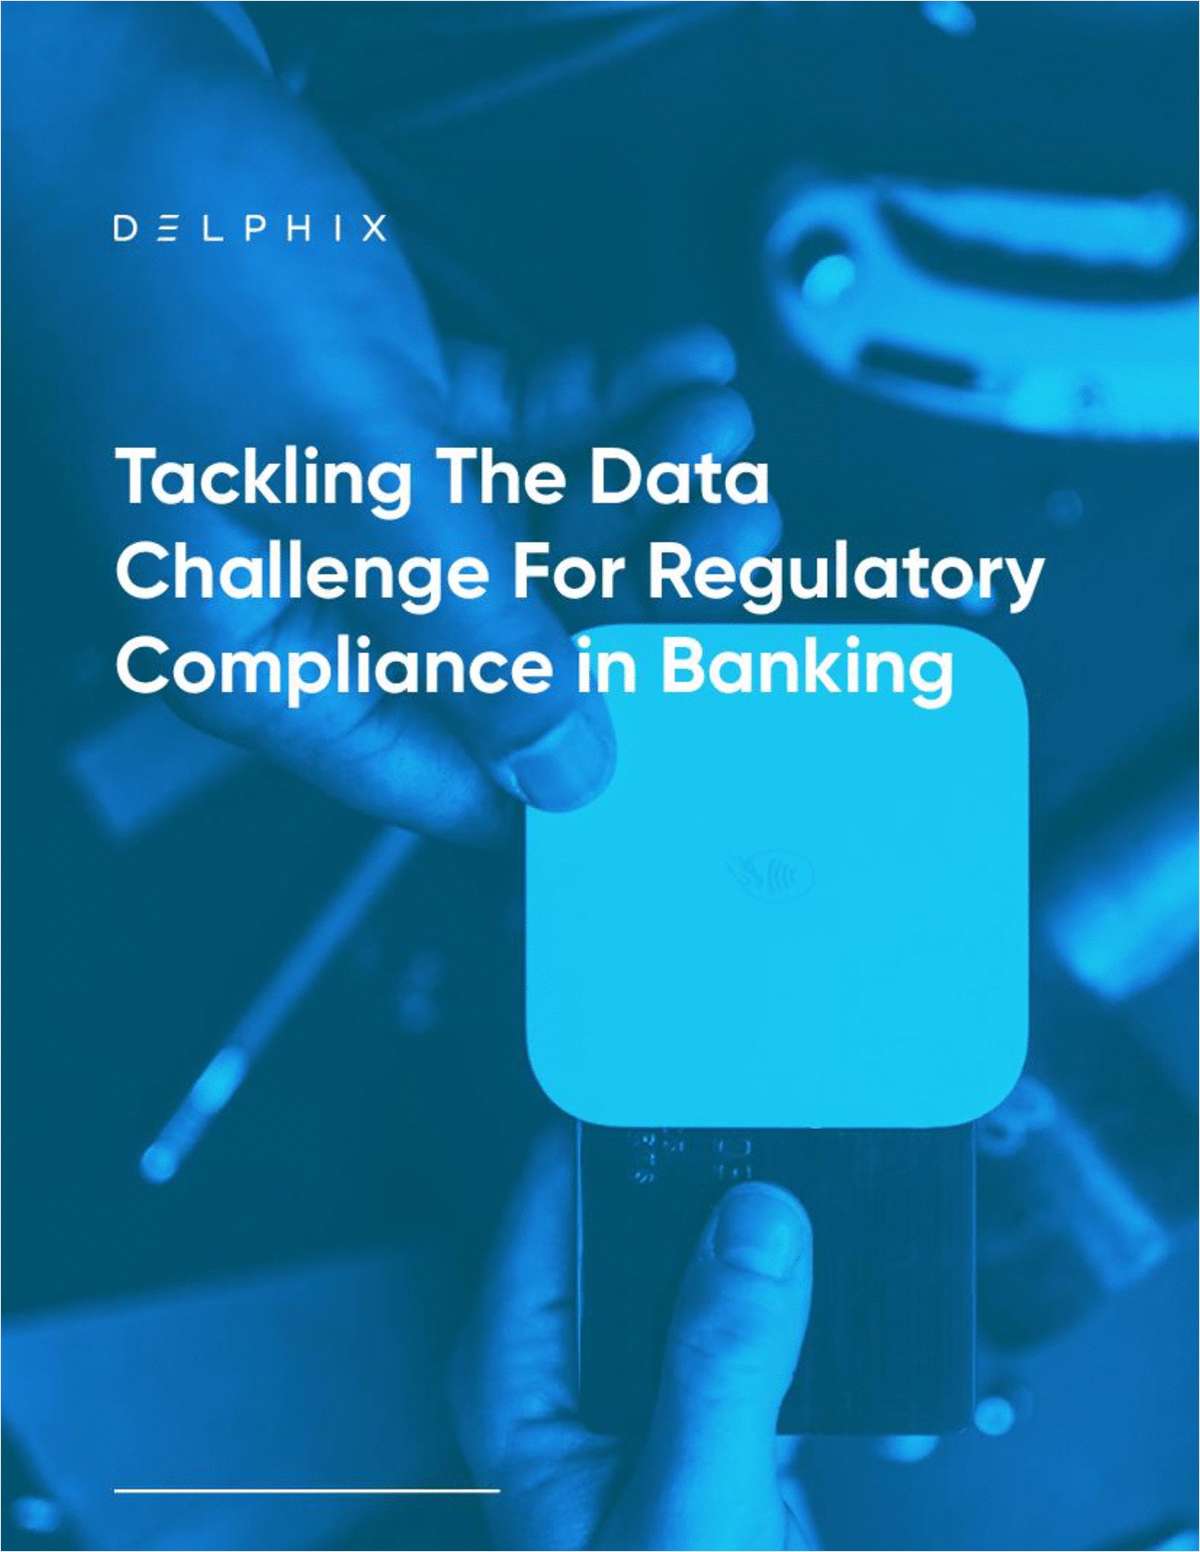 Tackling the Data Challenge for Regulatory Compliance in Banking